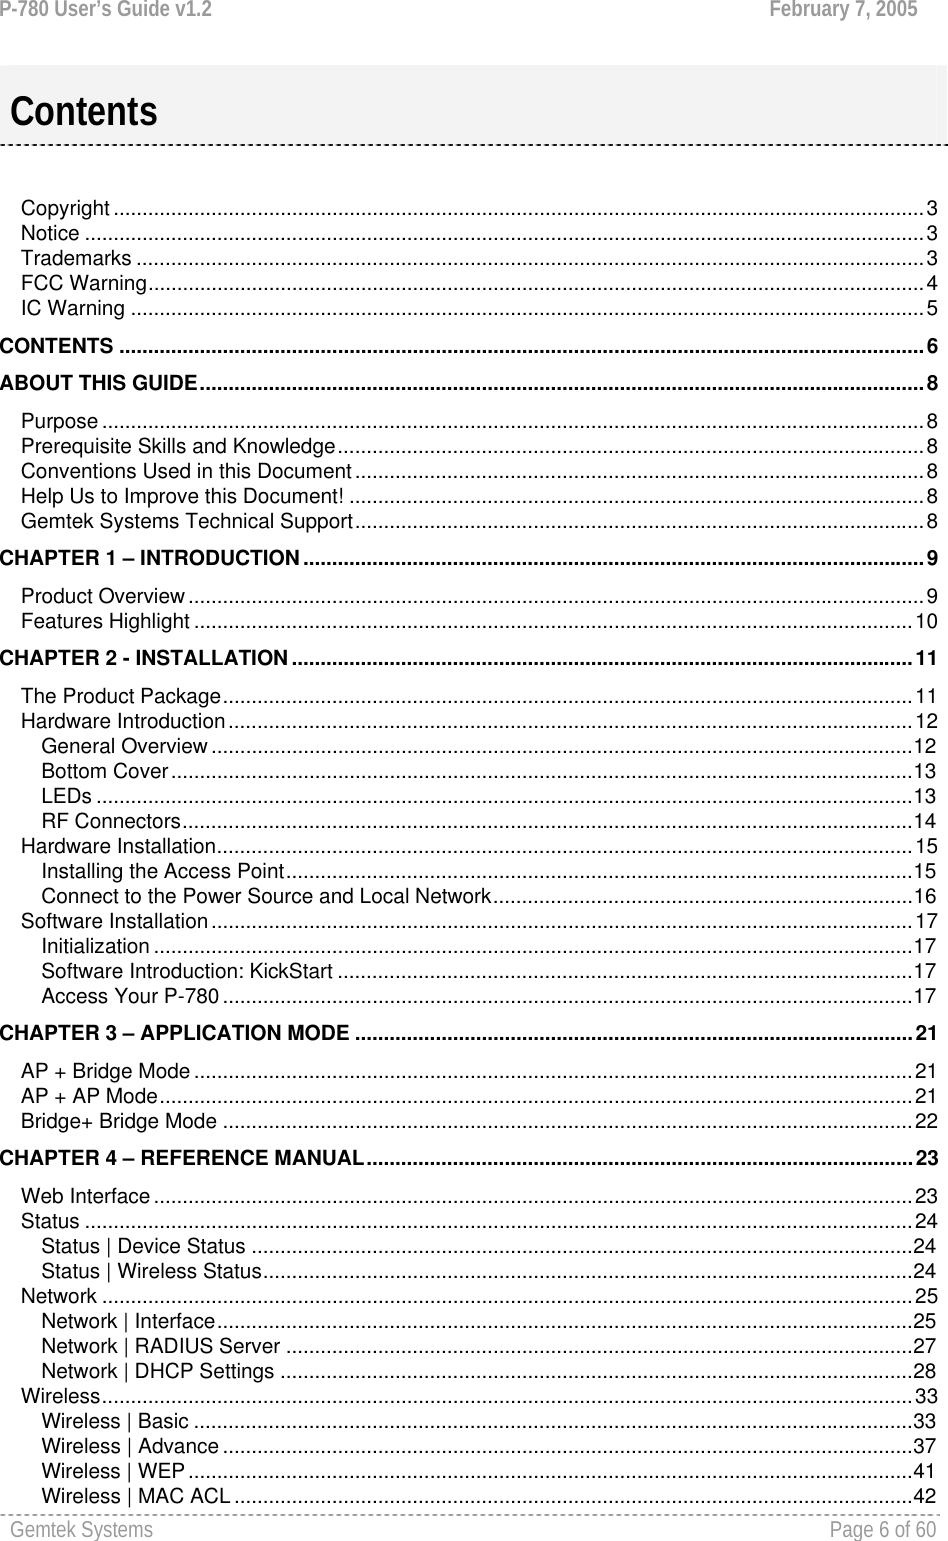 P-780 User’s Guide v1.2  February 7, 2005 Gemtek Systems    Page 6 of 60    Copyright .............................................................................................................................................3 Notice ..................................................................................................................................................3 Trademarks .........................................................................................................................................3 FCC Warning.......................................................................................................................................4 IC Warning ..........................................................................................................................................5 CONTENTS ............................................................................................................................................6 ABOUT THIS GUIDE..............................................................................................................................8 Purpose ...............................................................................................................................................8 Prerequisite Skills and Knowledge......................................................................................................8 Conventions Used in this Document...................................................................................................8 Help Us to Improve this Document! ....................................................................................................8 Gemtek Systems Technical Support...................................................................................................8 CHAPTER 1 – INTRODUCTION............................................................................................................9 Product Overview................................................................................................................................9 Features Highlight .............................................................................................................................10 CHAPTER 2 - INSTALLATION............................................................................................................11 The Product Package........................................................................................................................11 Hardware Introduction.......................................................................................................................12 General Overview ..........................................................................................................................12 Bottom Cover.................................................................................................................................13 LEDs ..............................................................................................................................................13 RF Connectors...............................................................................................................................14 Hardware Installation.........................................................................................................................15 Installing the Access Point.............................................................................................................15 Connect to the Power Source and Local Network.........................................................................16 Software Installation..........................................................................................................................17 Initialization ....................................................................................................................................17 Software Introduction: KickStart ....................................................................................................17 Access Your P-780 ........................................................................................................................17 CHAPTER 3 – APPLICATION MODE .................................................................................................21 AP + Bridge Mode .............................................................................................................................21 AP + AP Mode...................................................................................................................................21 Bridge+ Bridge Mode ........................................................................................................................22 CHAPTER 4 – REFERENCE MANUAL...............................................................................................23 Web Interface....................................................................................................................................23 Status ................................................................................................................................................24 Status | Device Status ...................................................................................................................24 Status | Wireless Status.................................................................................................................24 Network .............................................................................................................................................25 Network | Interface.........................................................................................................................25 Network | RADIUS Server .............................................................................................................27 Network | DHCP Settings ..............................................................................................................28 Wireless.............................................................................................................................................33 Wireless | Basic .............................................................................................................................33 Wireless | Advance ........................................................................................................................37 Wireless | WEP..............................................................................................................................41 Wireless | MAC ACL ......................................................................................................................42 Contents 